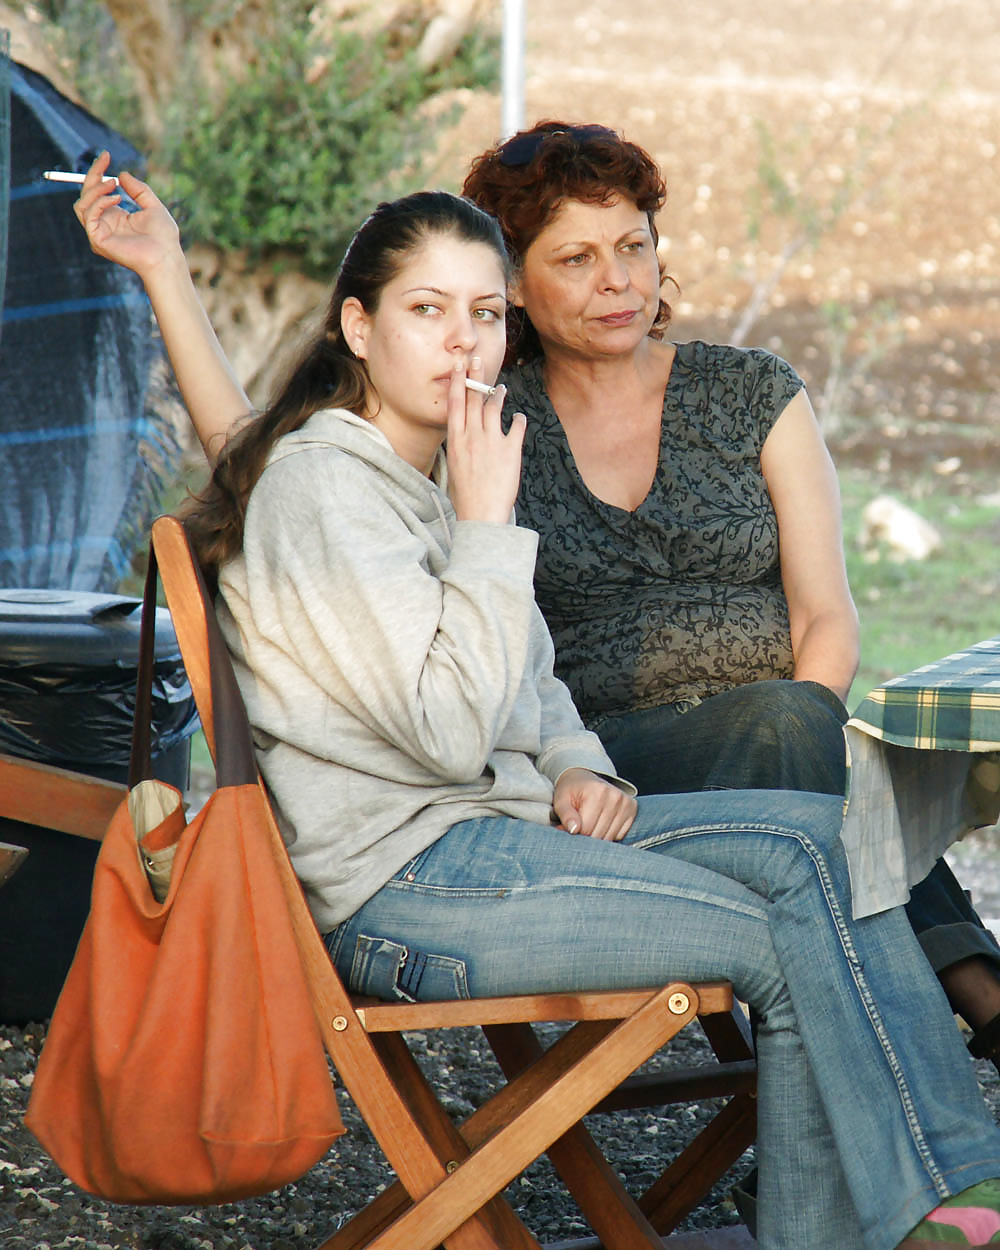 Mothers and Daughters Smoking #7324435